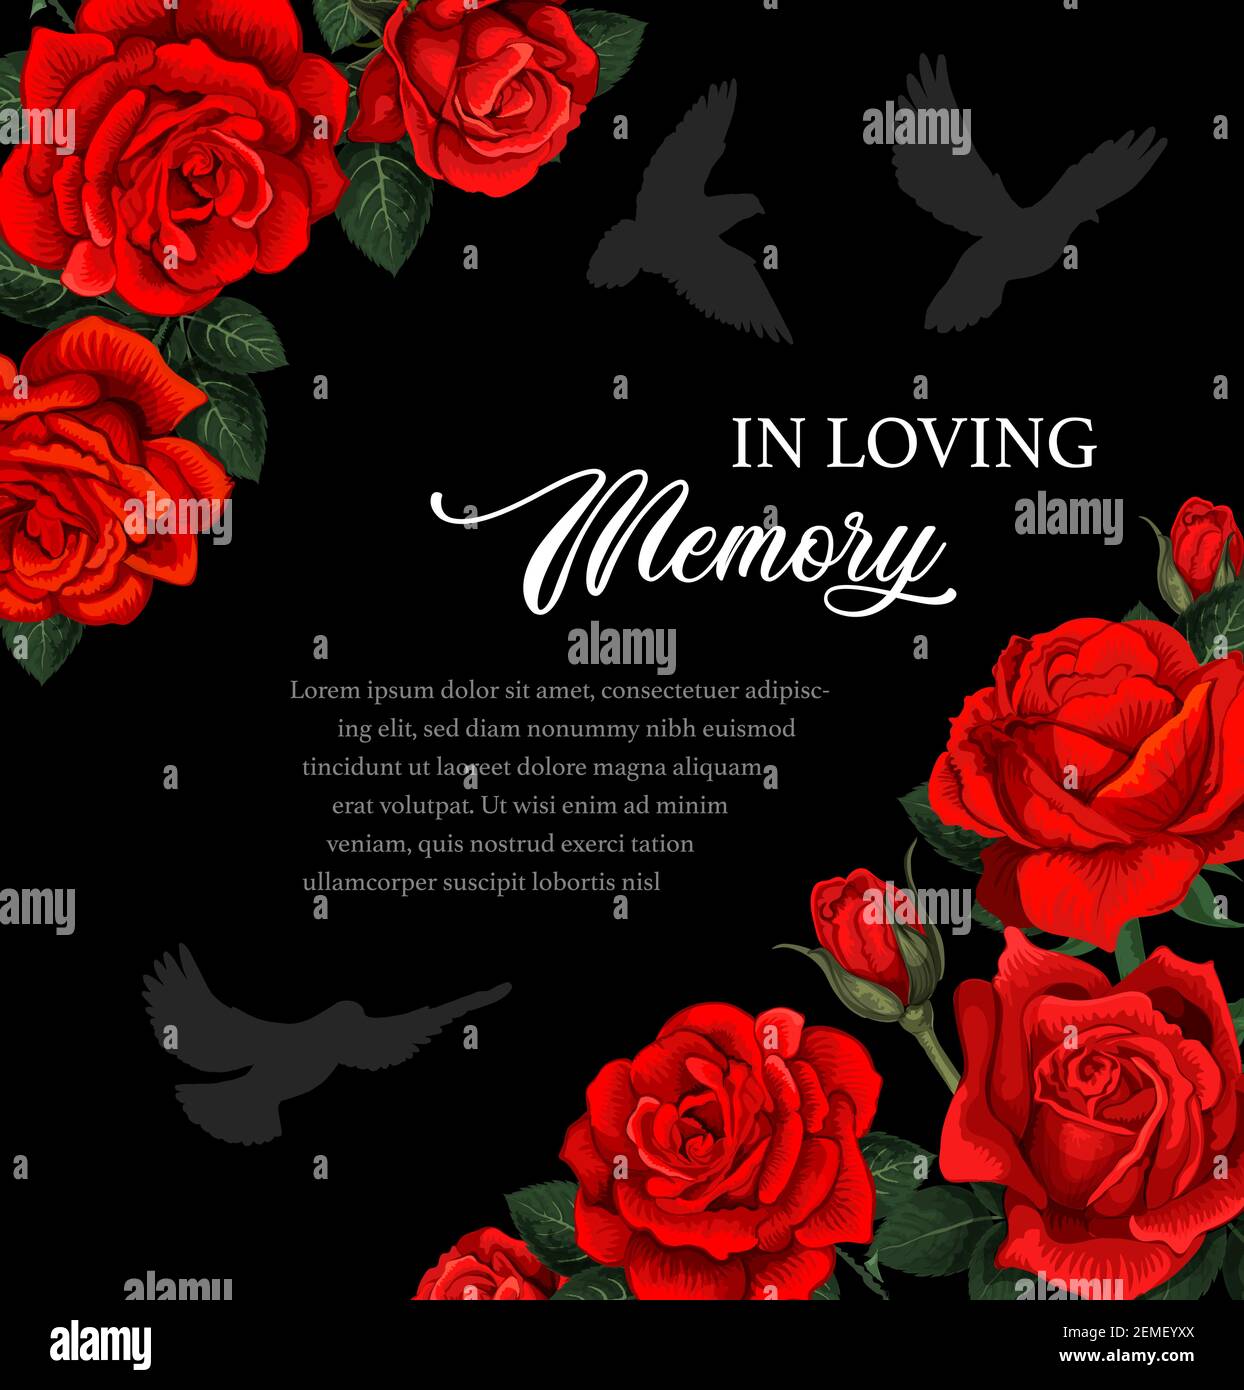 Funeral vector card with red rose flowers and doves silhouettes. Obituary poster with floral decoration, in loving memory typography. Vintage card wit Stock Vector